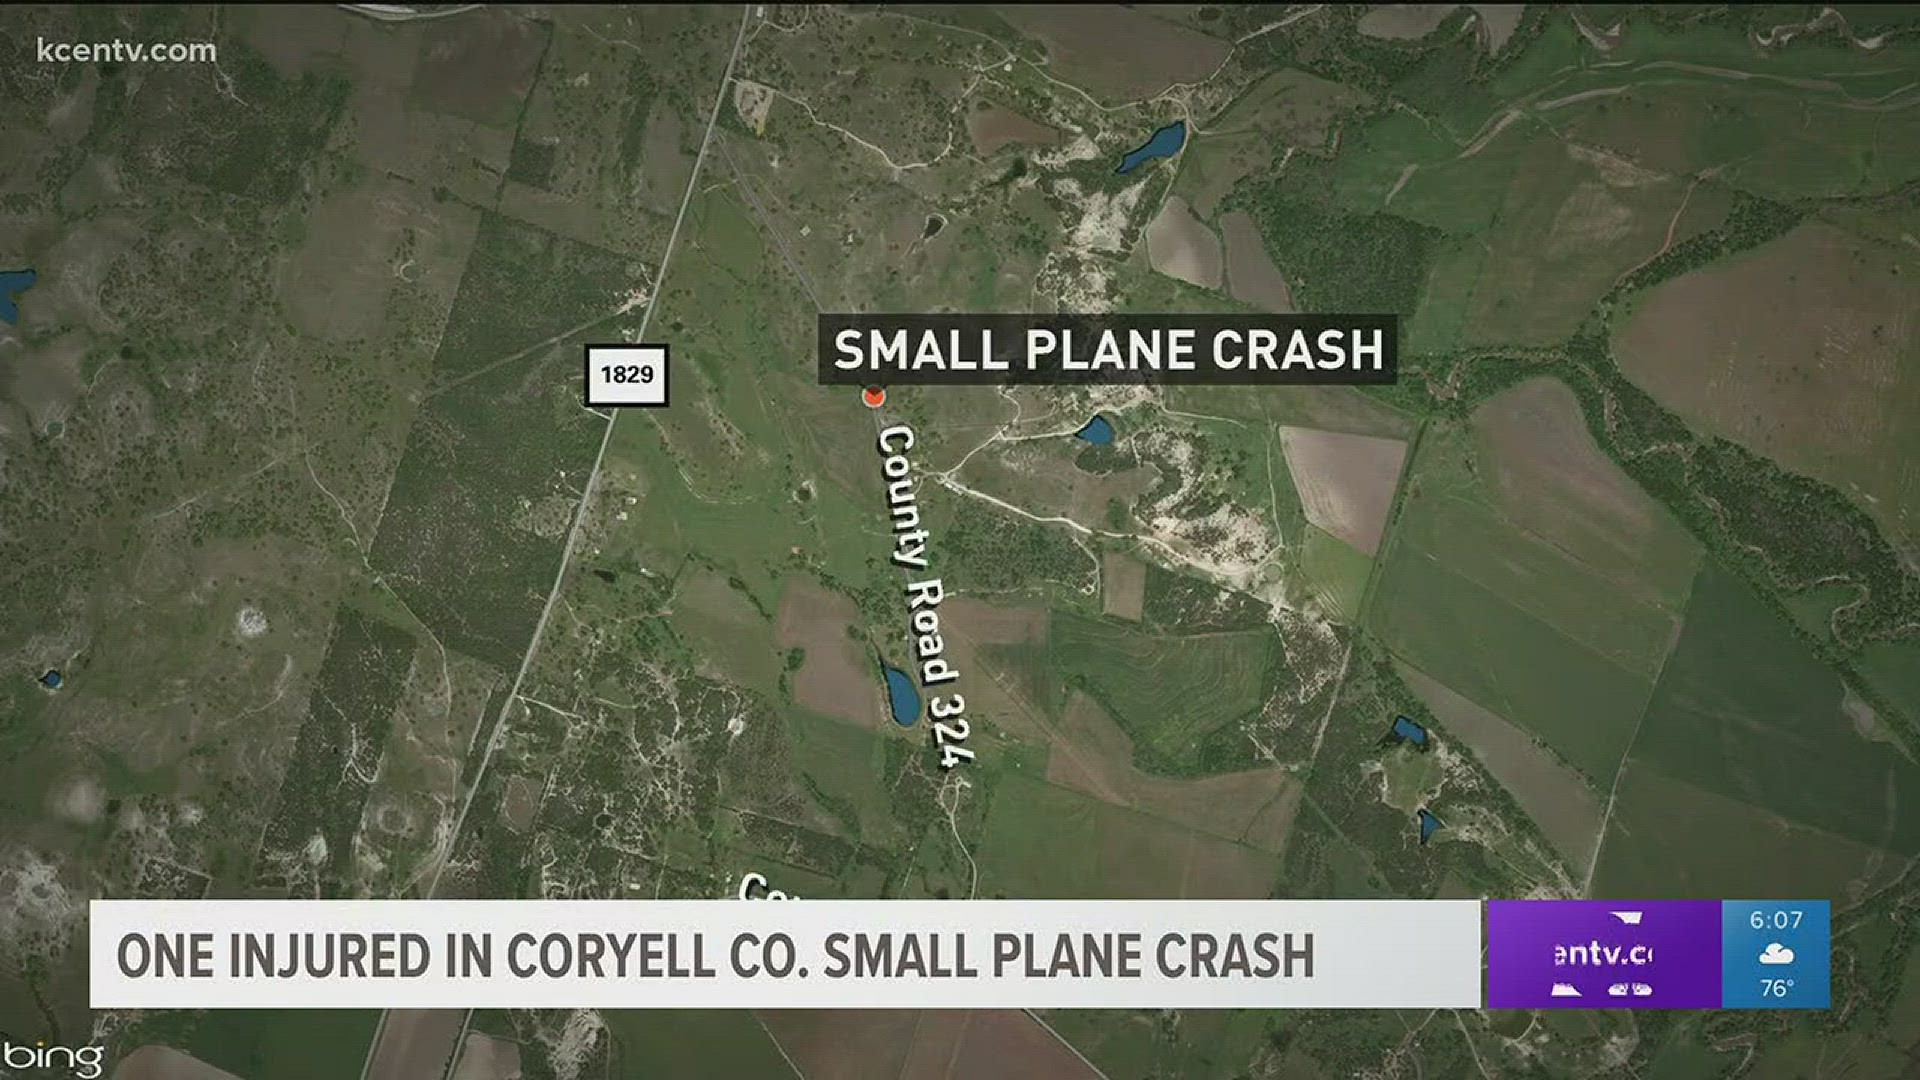 A pilot in Coryell County is recovering after authorities said his small plane crashed